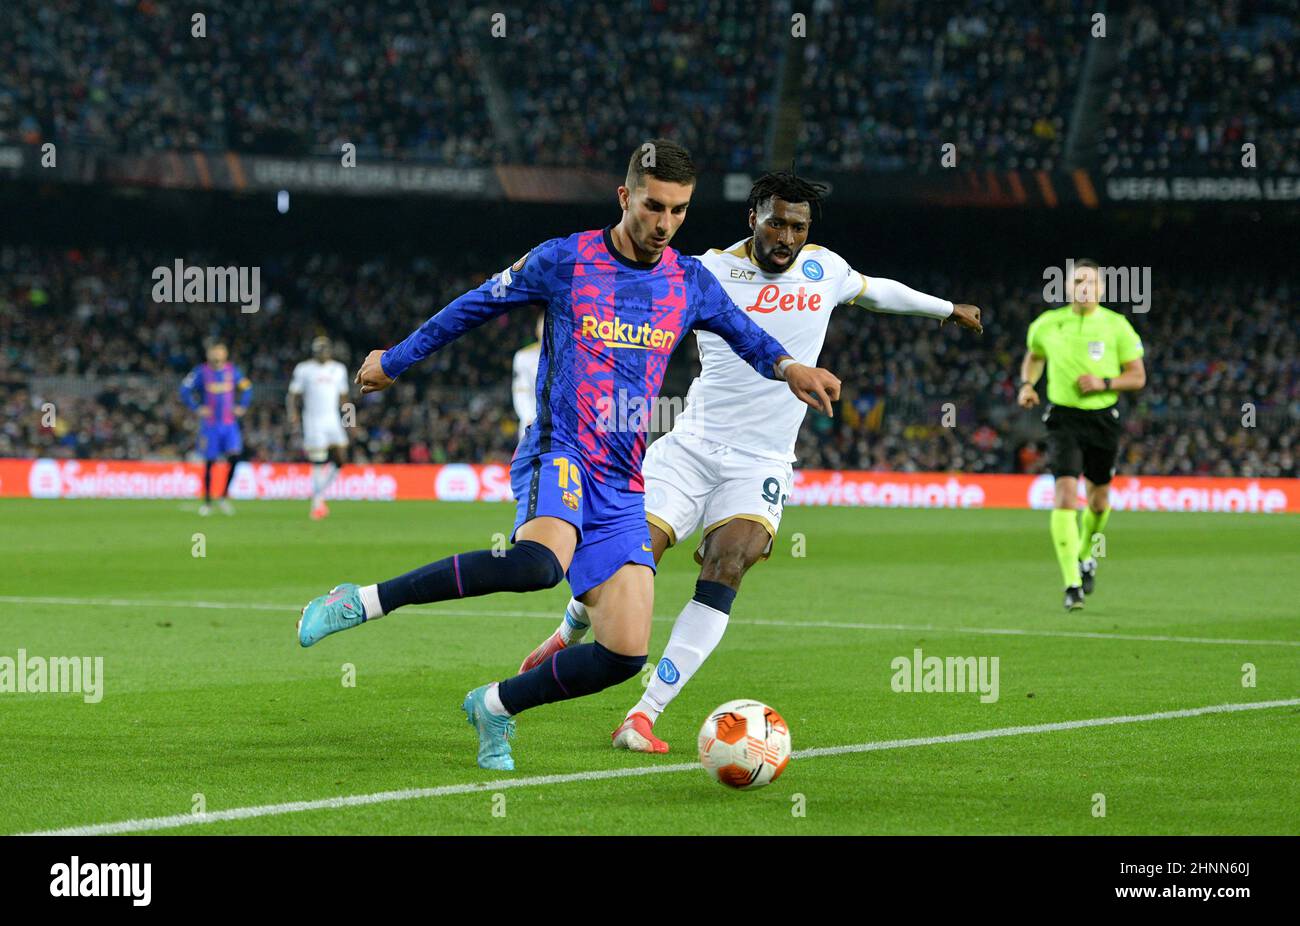 Barcelona,Spain.17 February,2022.  Ferran Torres dribles during the Europa League match between FC Barcelona and SSC Napoli at Camp Nou Stadium. Credit: rosdemora/Alamy Live News Stock Photo